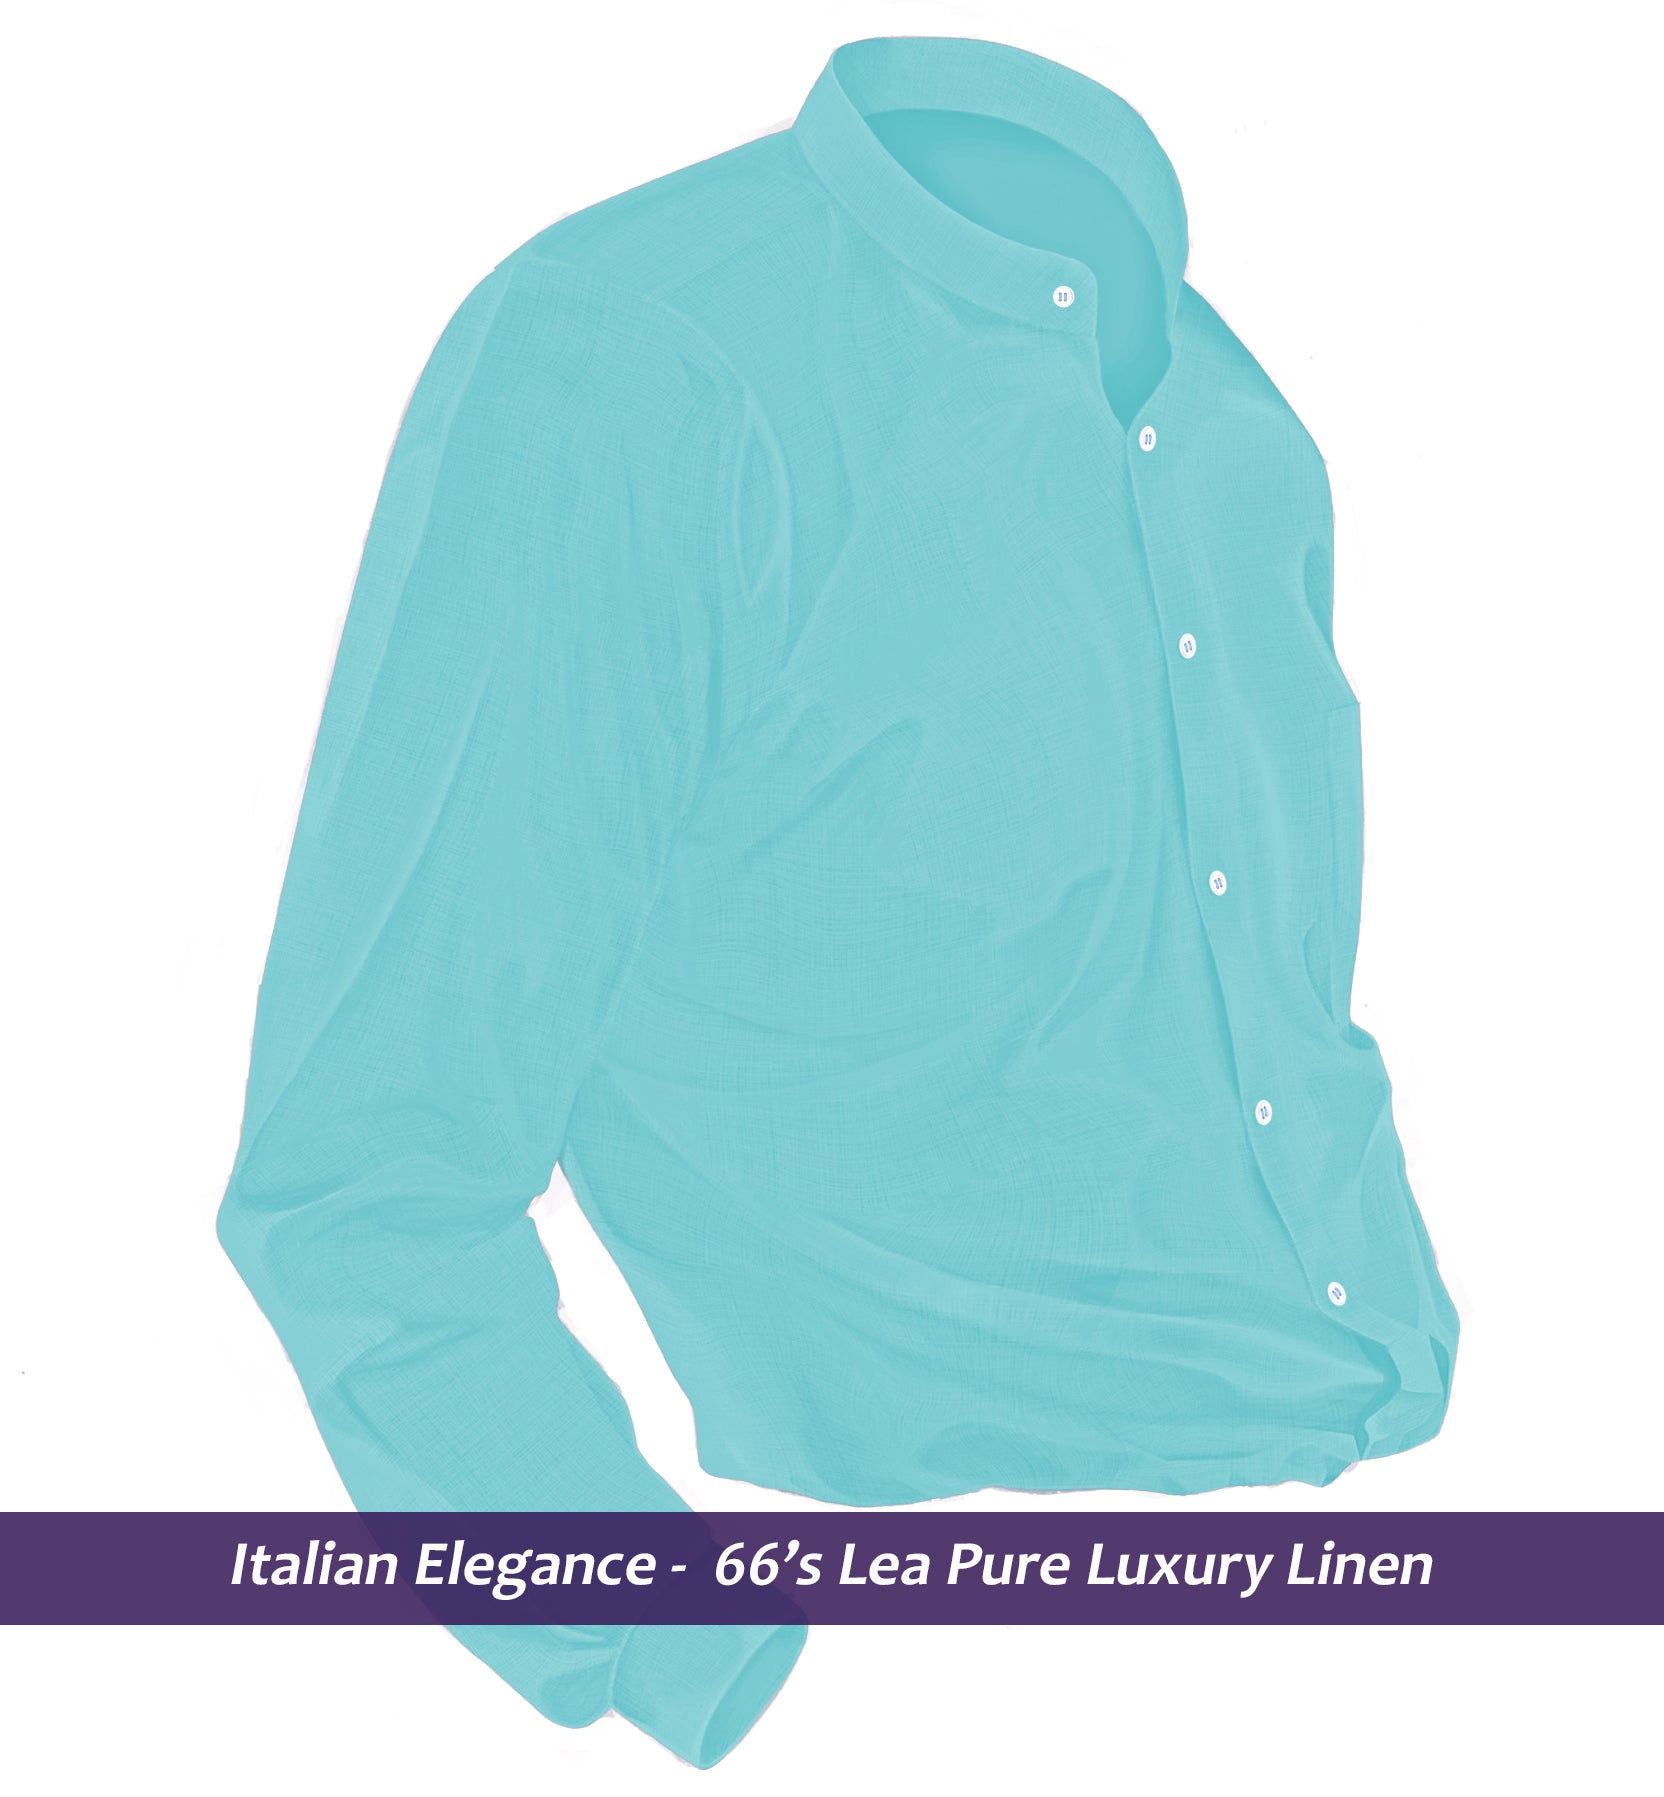 Munich- Turquoise Green Linen- Mandarin Collar- 66's Lea Pure Luxury Linen-Delivery from 12th May